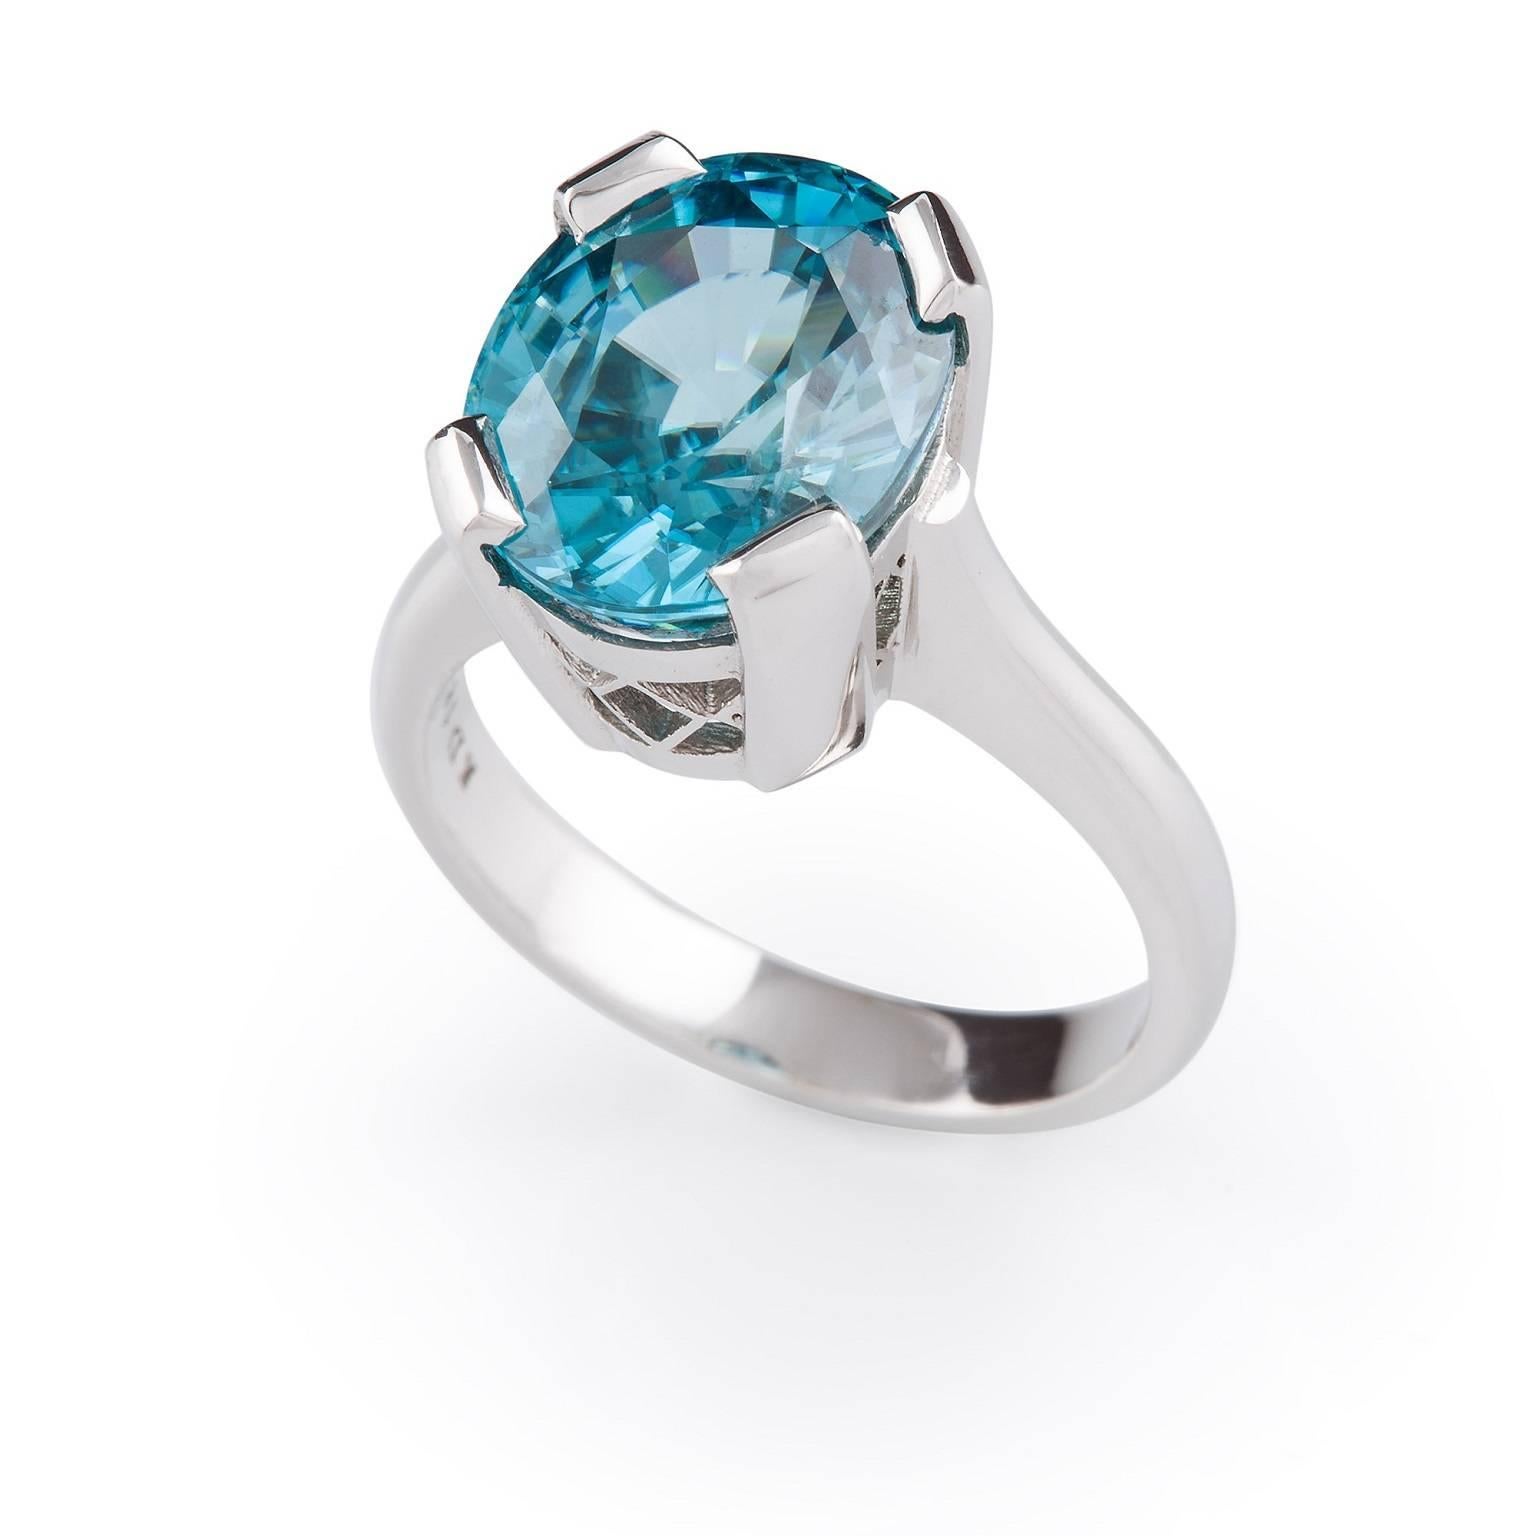 Zircone Blu Ring

This stunning dress ring in 18 carat white gold is set with a single natural blue zircon in a fancy four claw basket setting. 

Oval faceted zircon: medium blue, attractive stone, 7.71 carats, 
measuring approximately 12.35 x 9.97